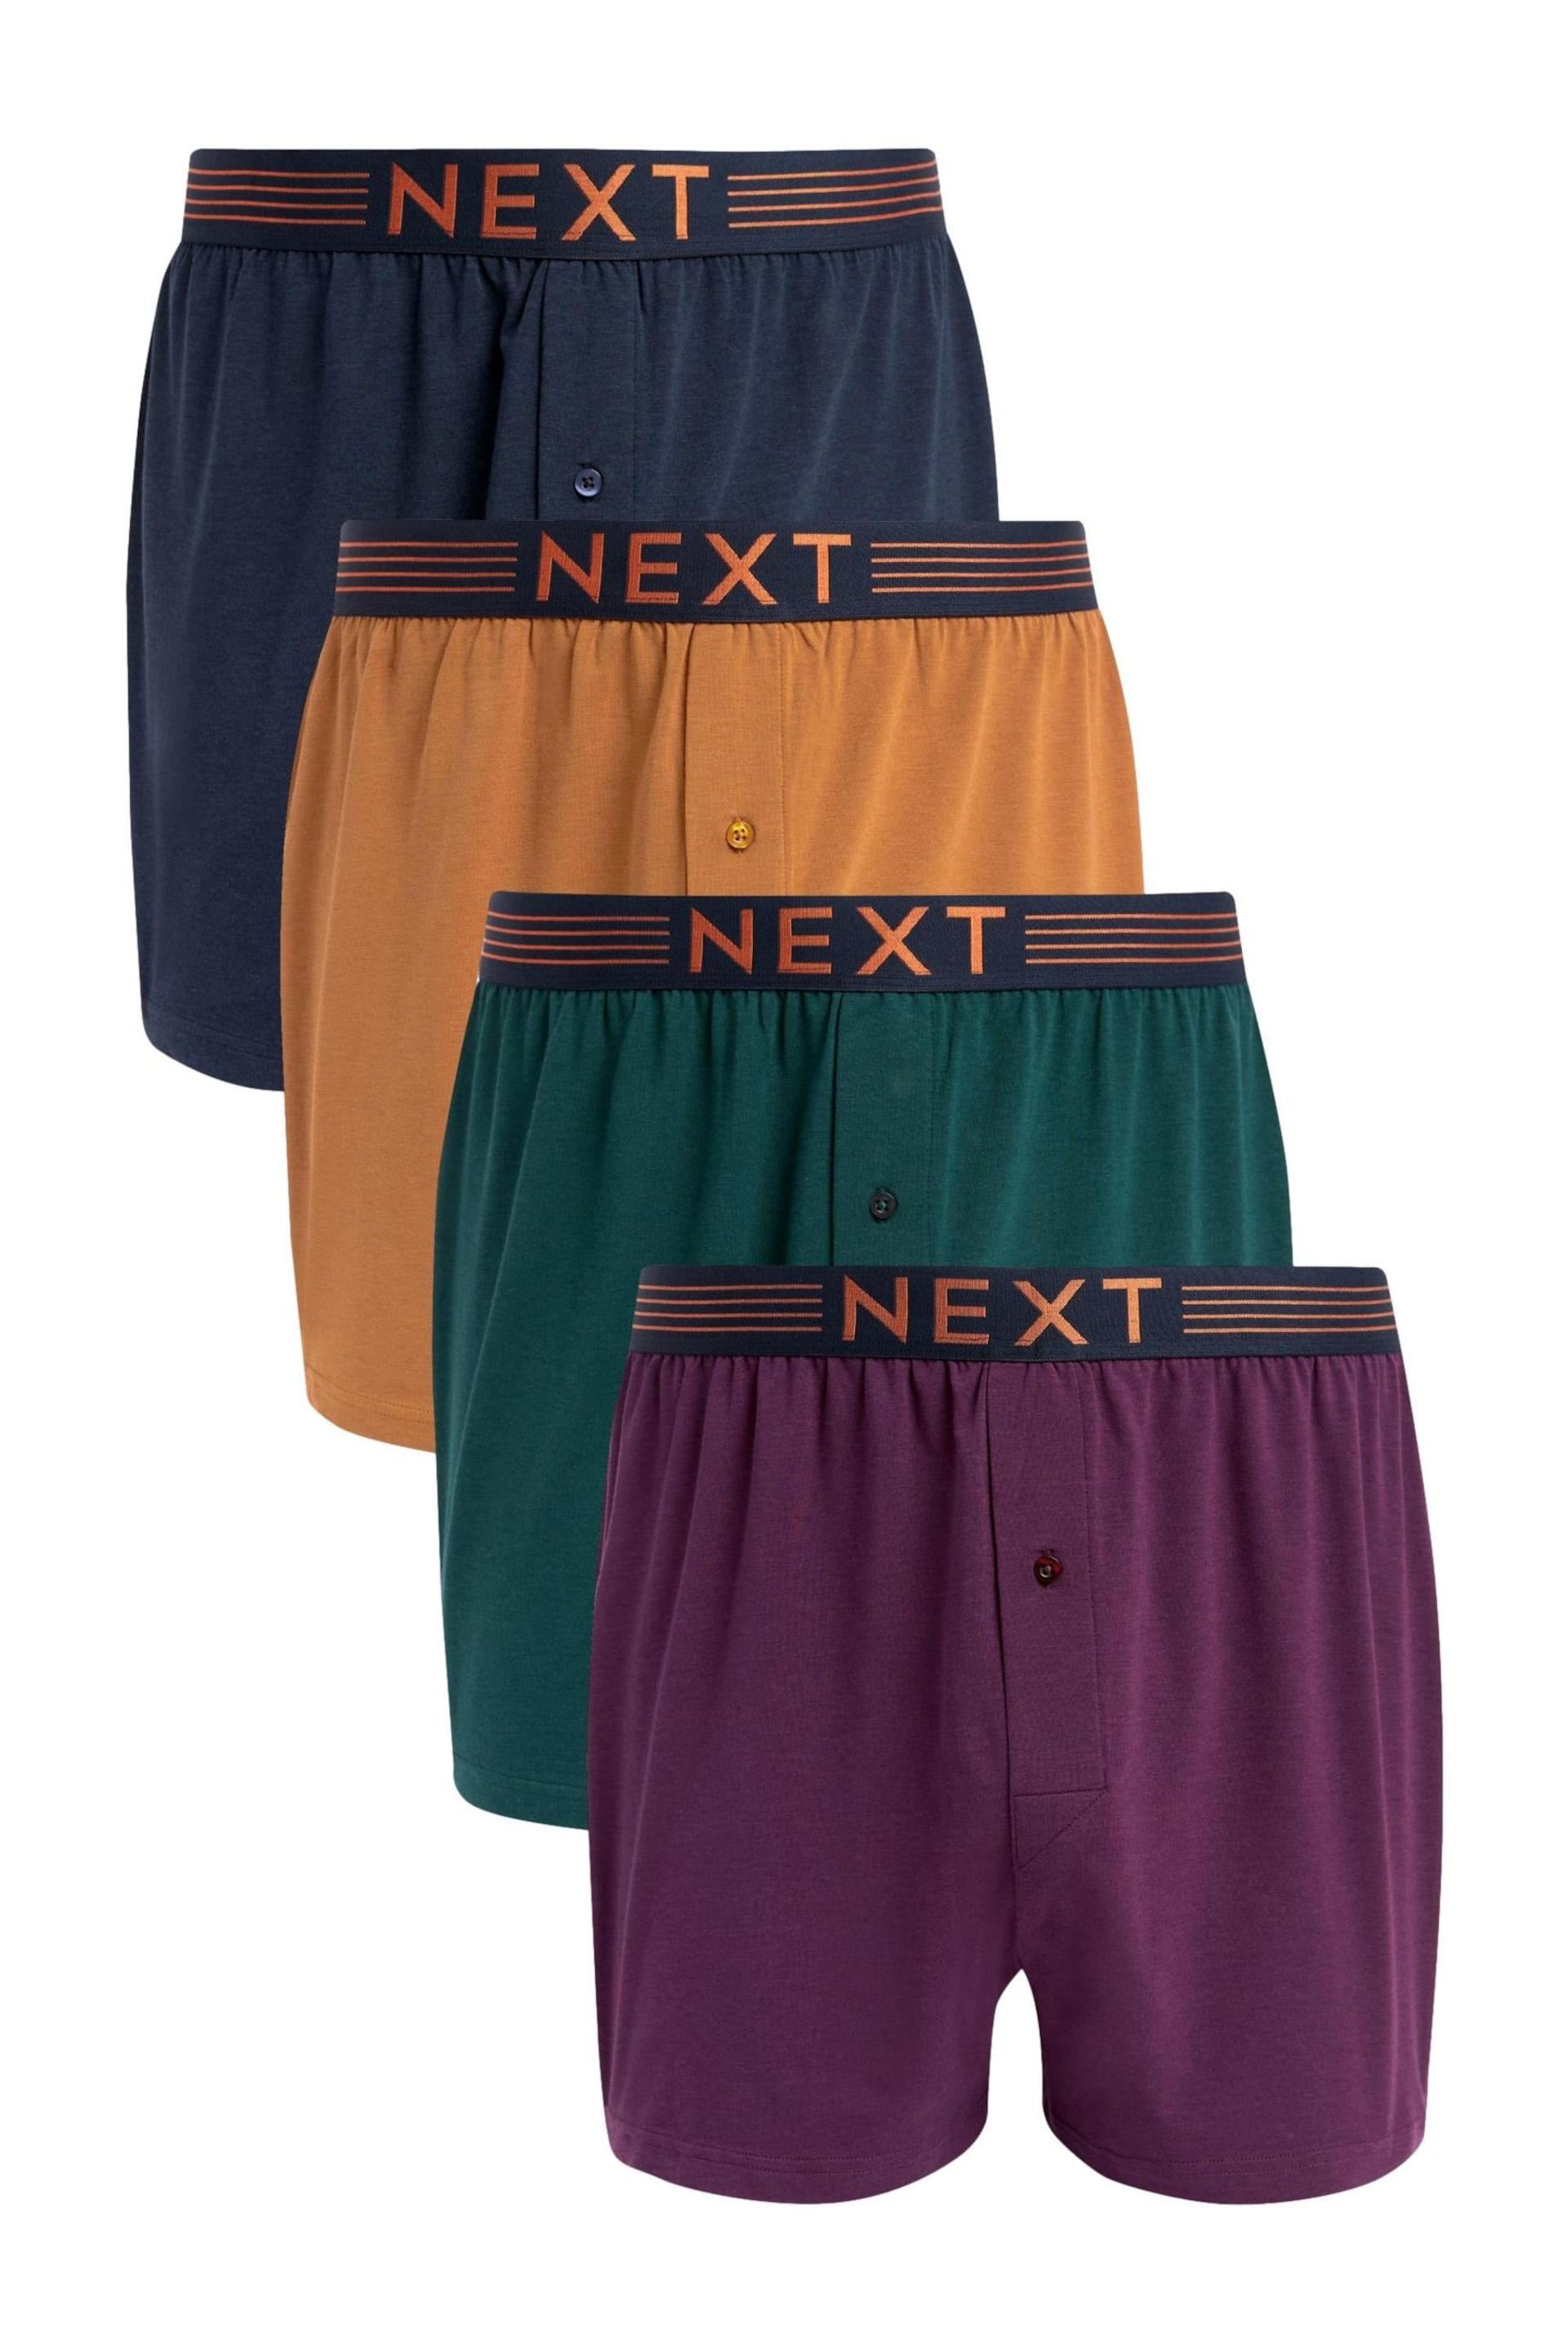 Rich Purple/Bronze 4 pack Signature Bamboo Boxers - Image 1 of 7